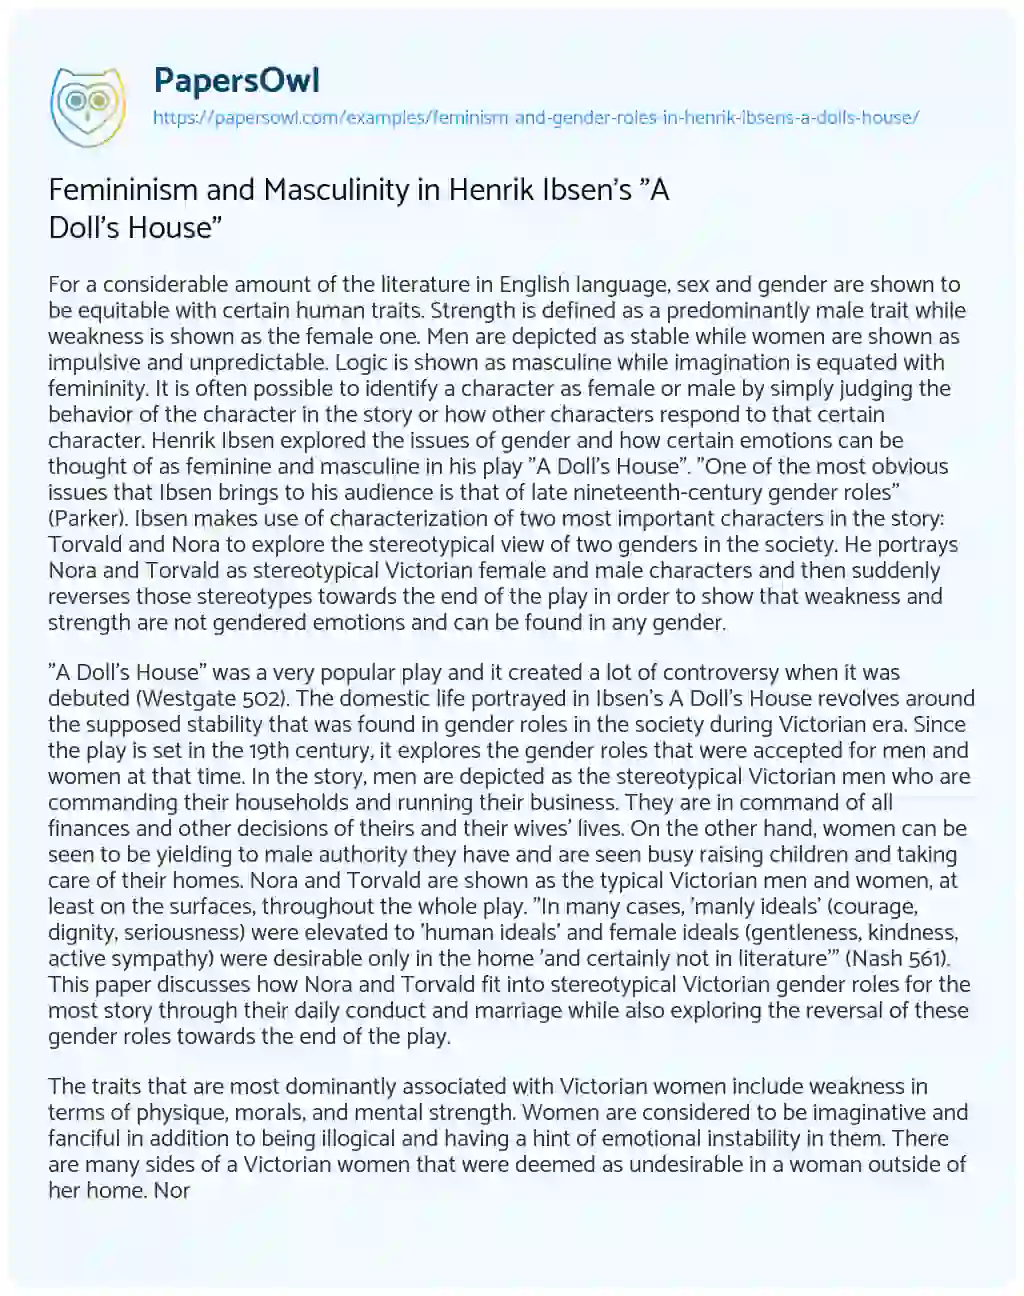 Essay on Femininism and Masculinity in Henrik Ibsen’s “A Doll’s House”